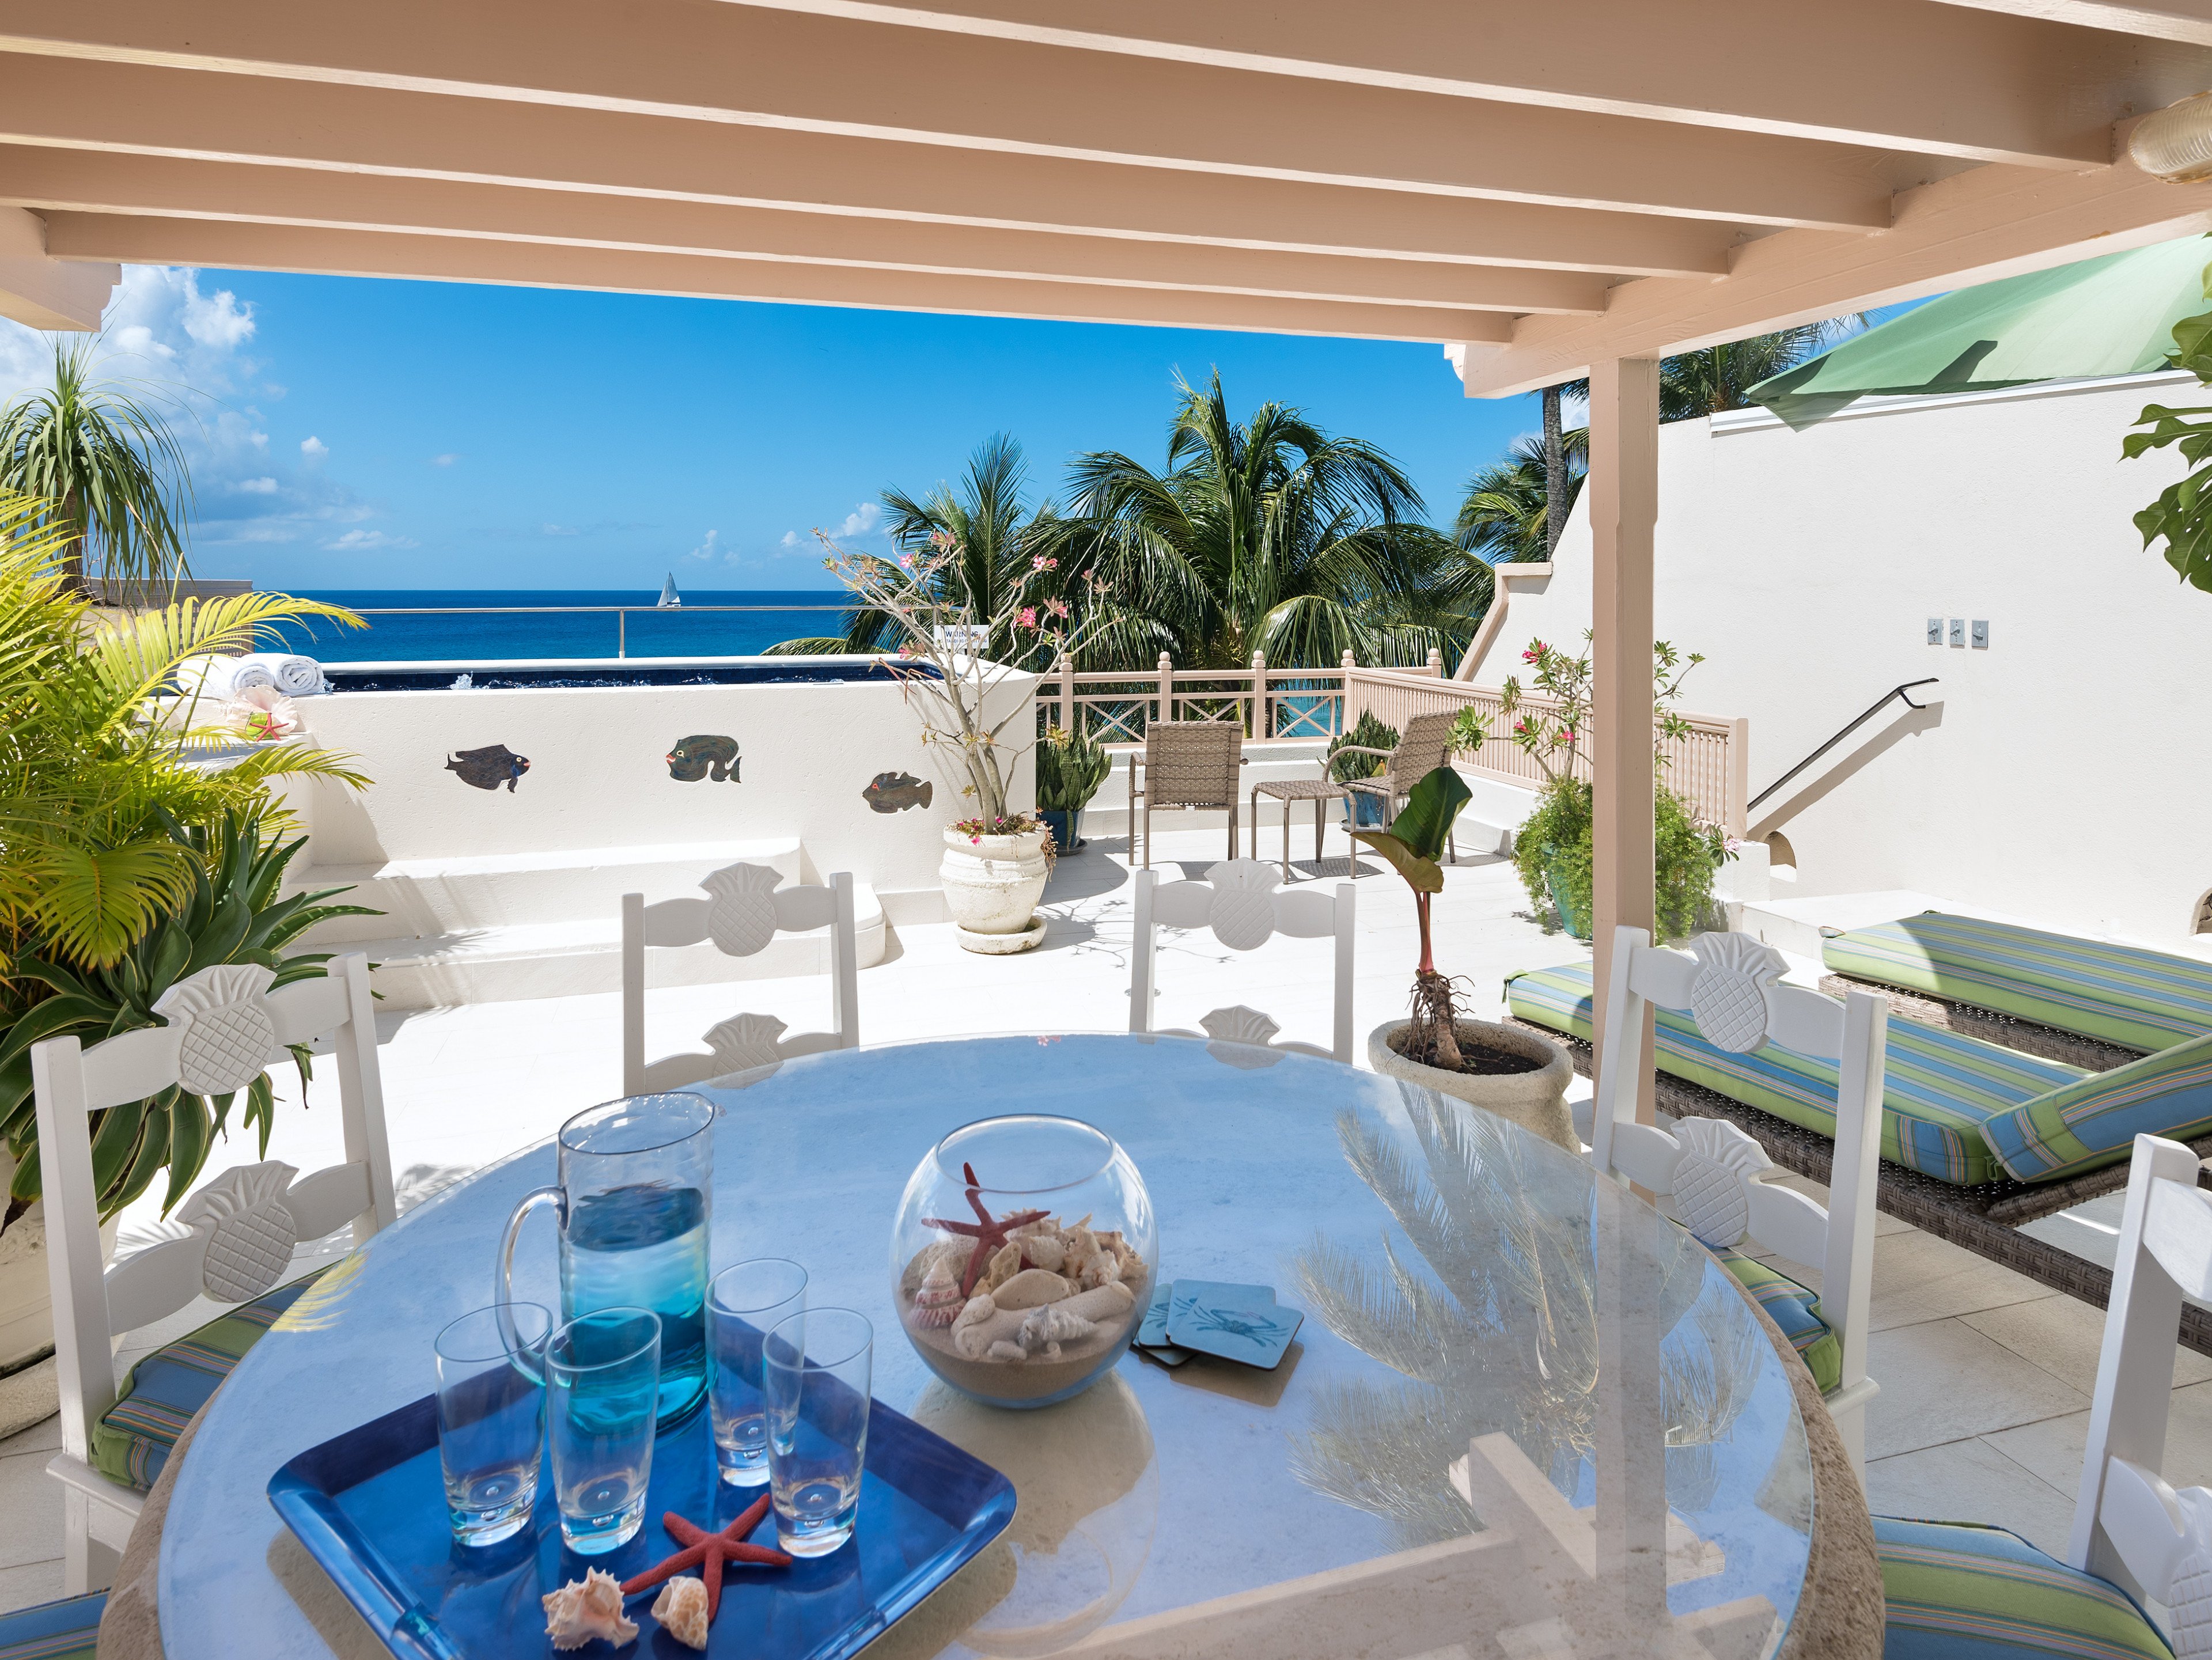 Reeds House 1 - Penthouse vacation rentals for couples near a beach